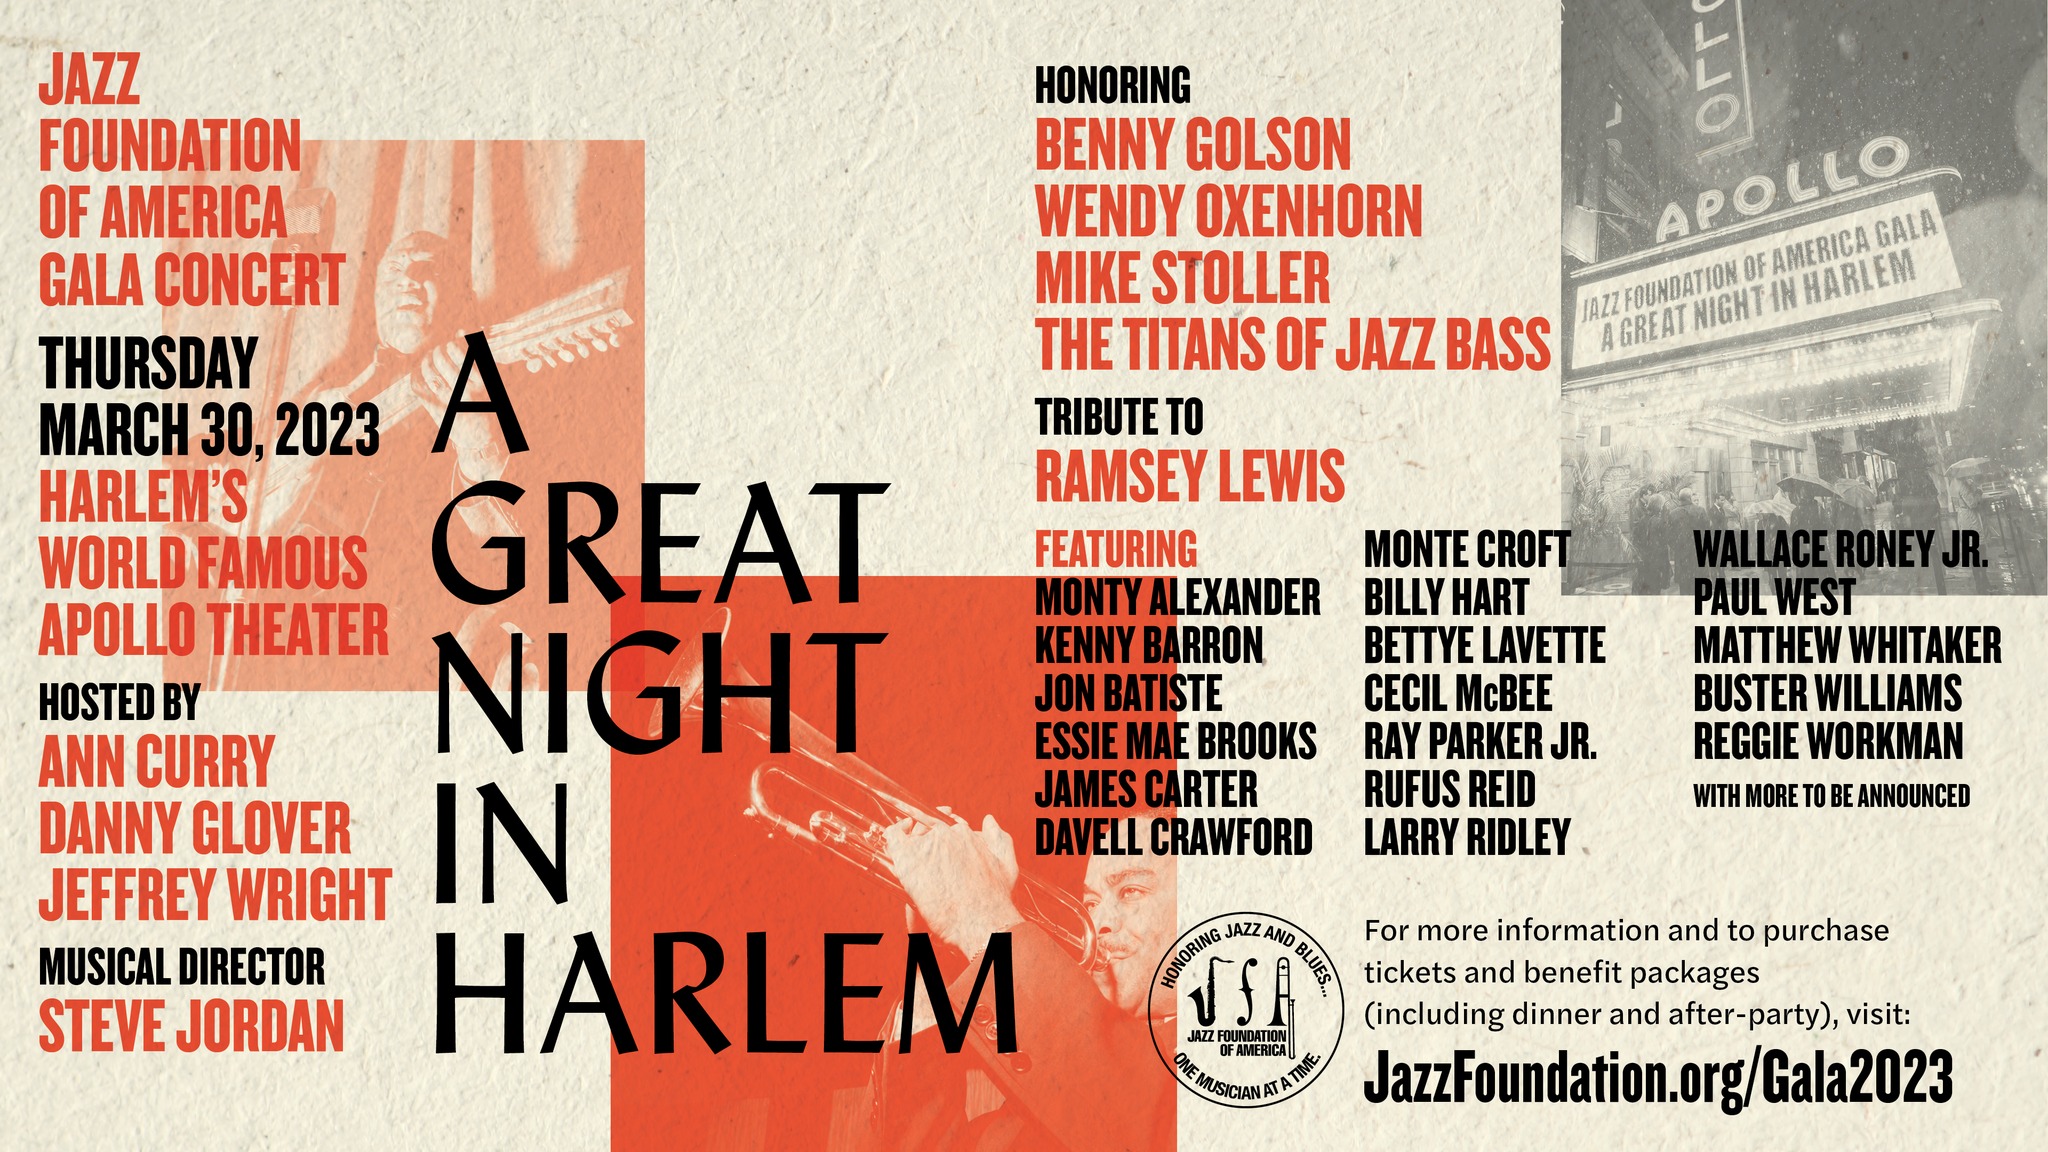 ‘A GREAT NIGHT IN HARLEM’ RETURNS THURSDAY, MARCH 30TH AT THE APOLLO THEATER